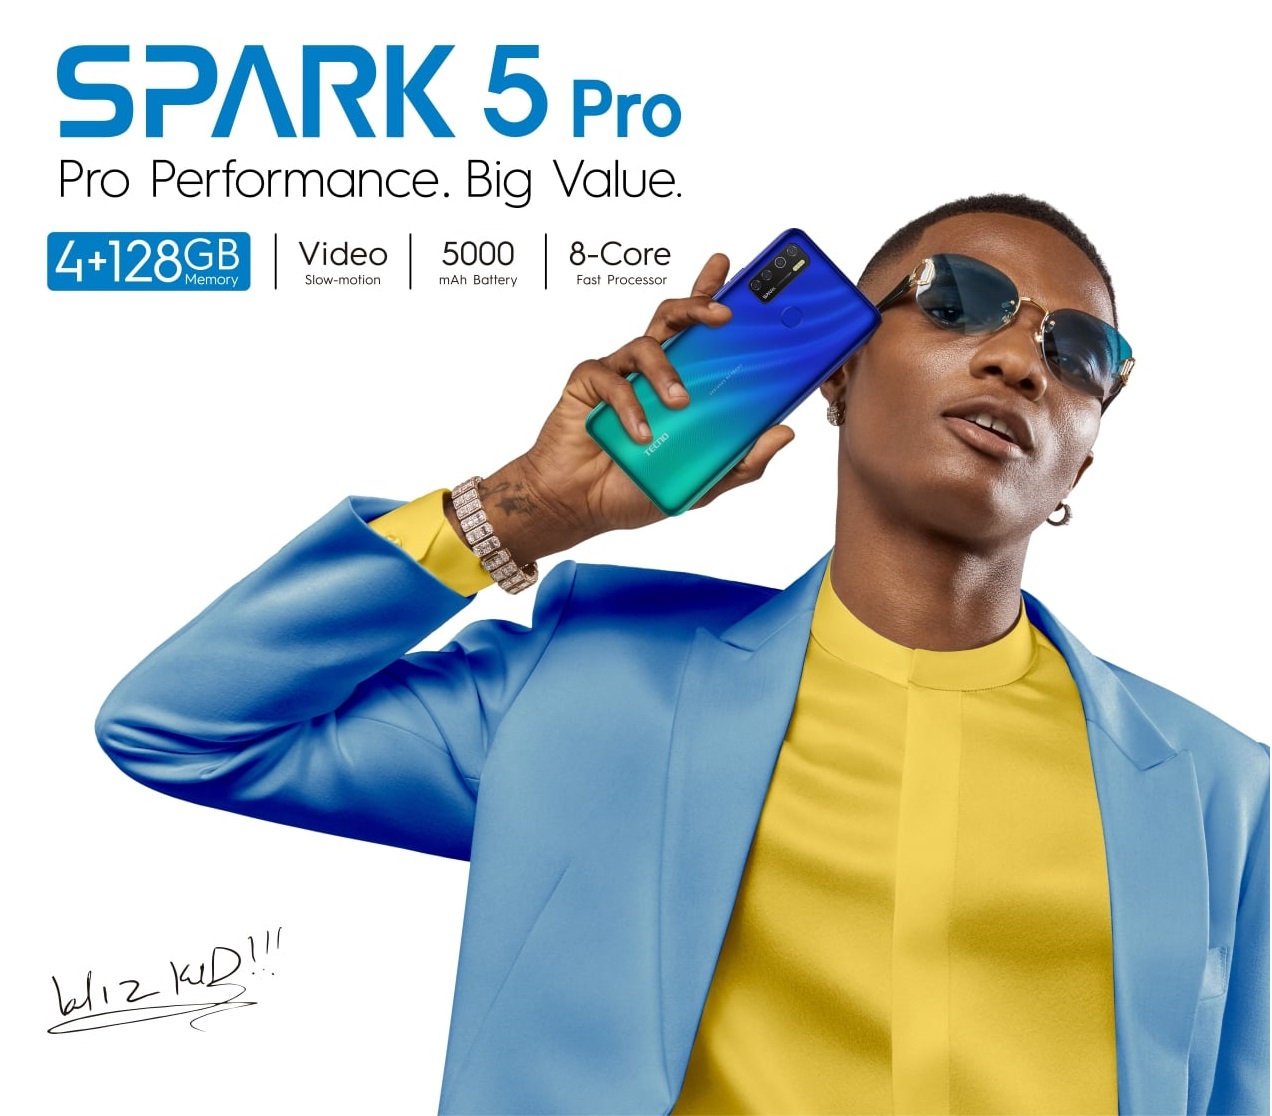 Top Big Value Upgrades of Spark 5 Pro compared to the Spark 5